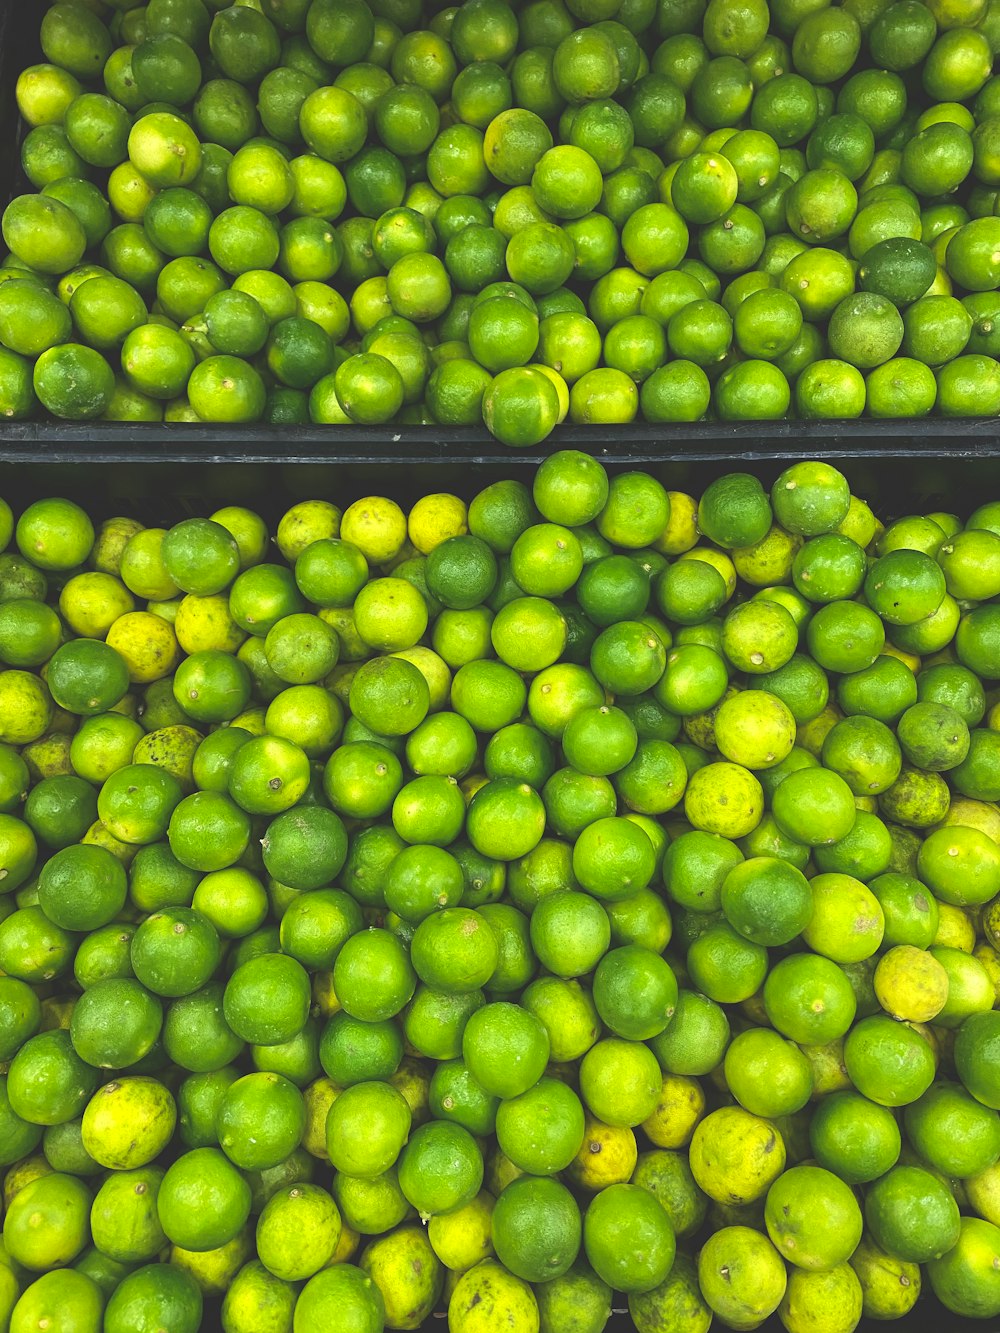 two bins filled with limes and lemons